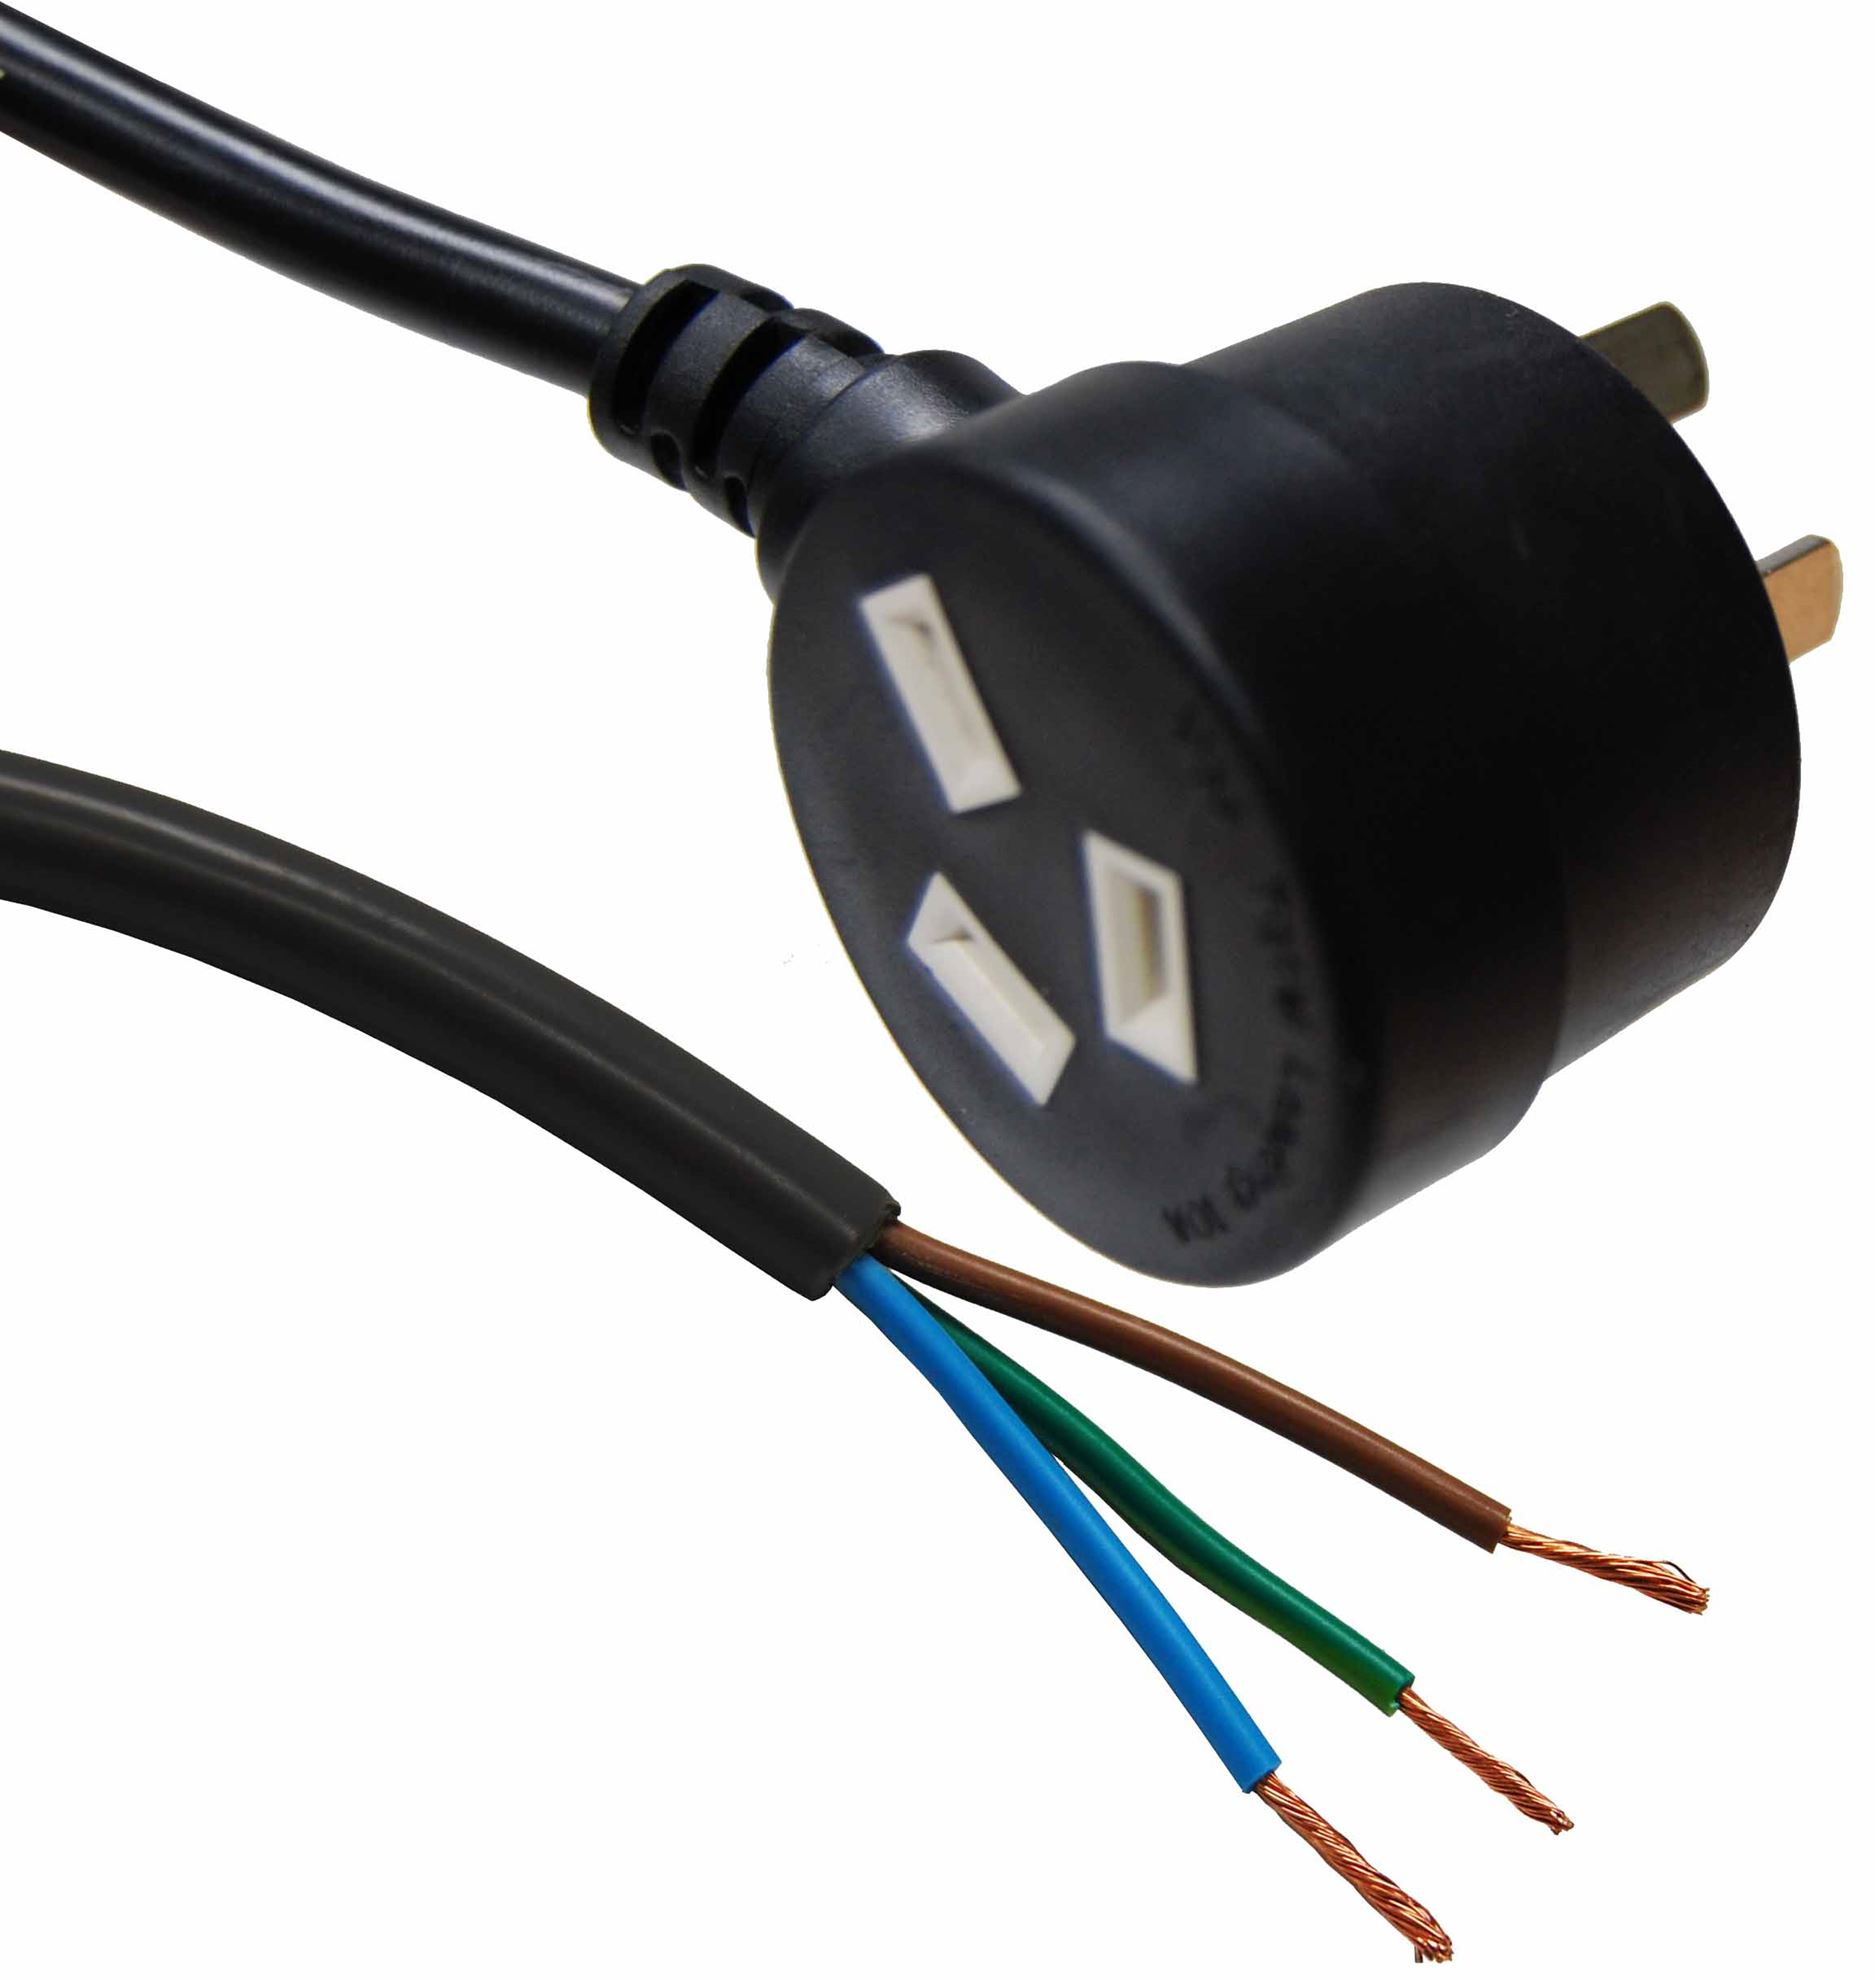 2M 3 Pin Tapon Plug to Bare End, 3 Core 1mm Cable, Black Colour, SAA Approved